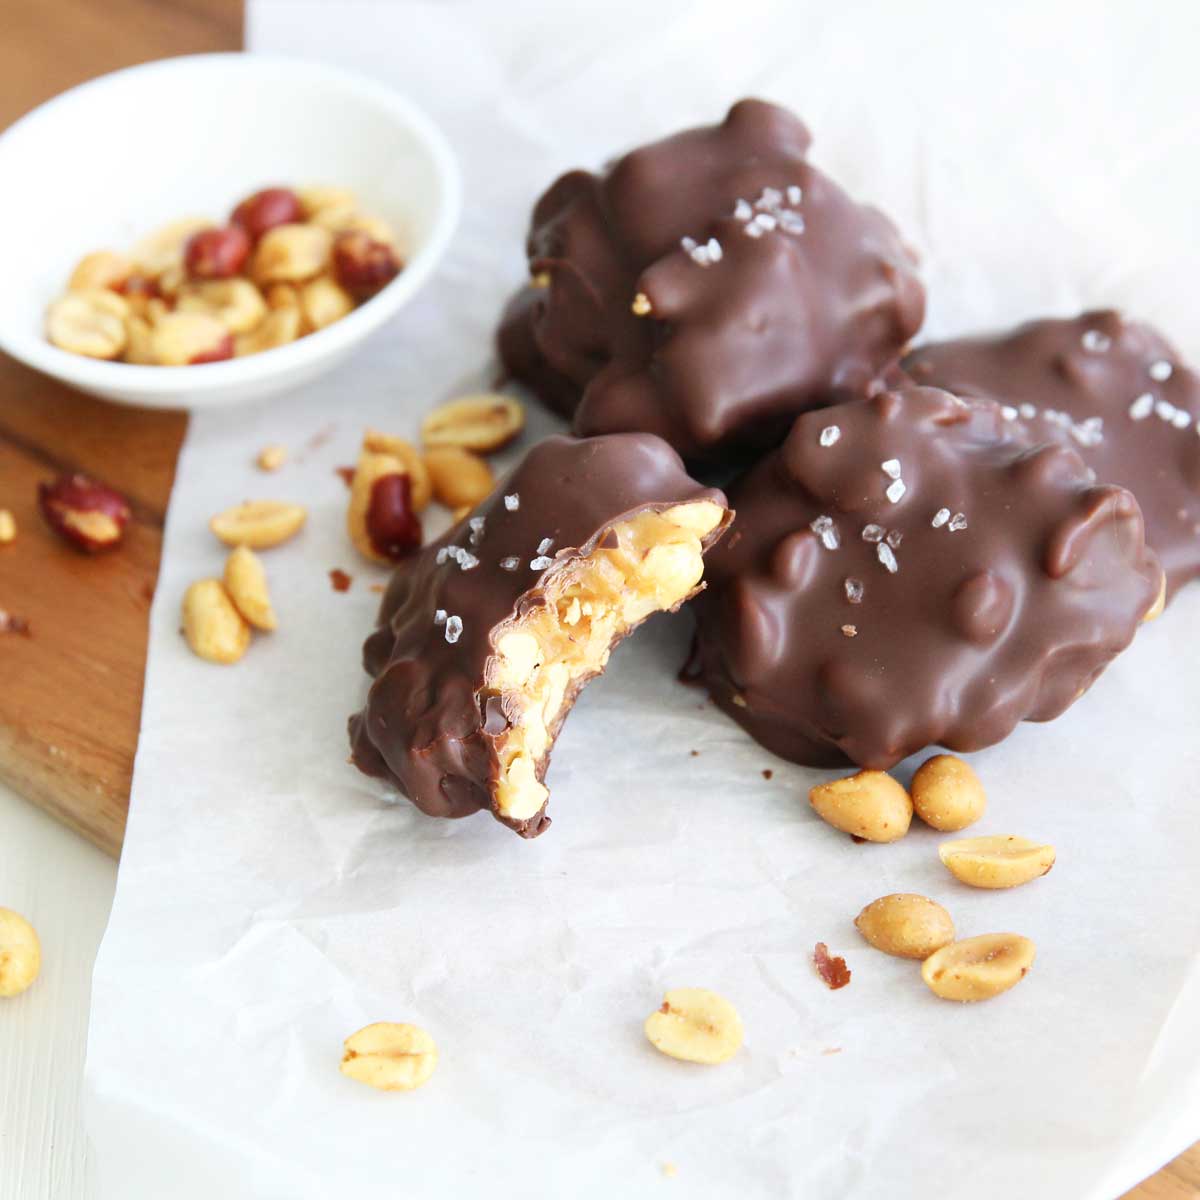 Chocolate Peanut Clusters with Collagen Caramel Filling (Easy, Keto Recipe) - Sweet Taro Paste